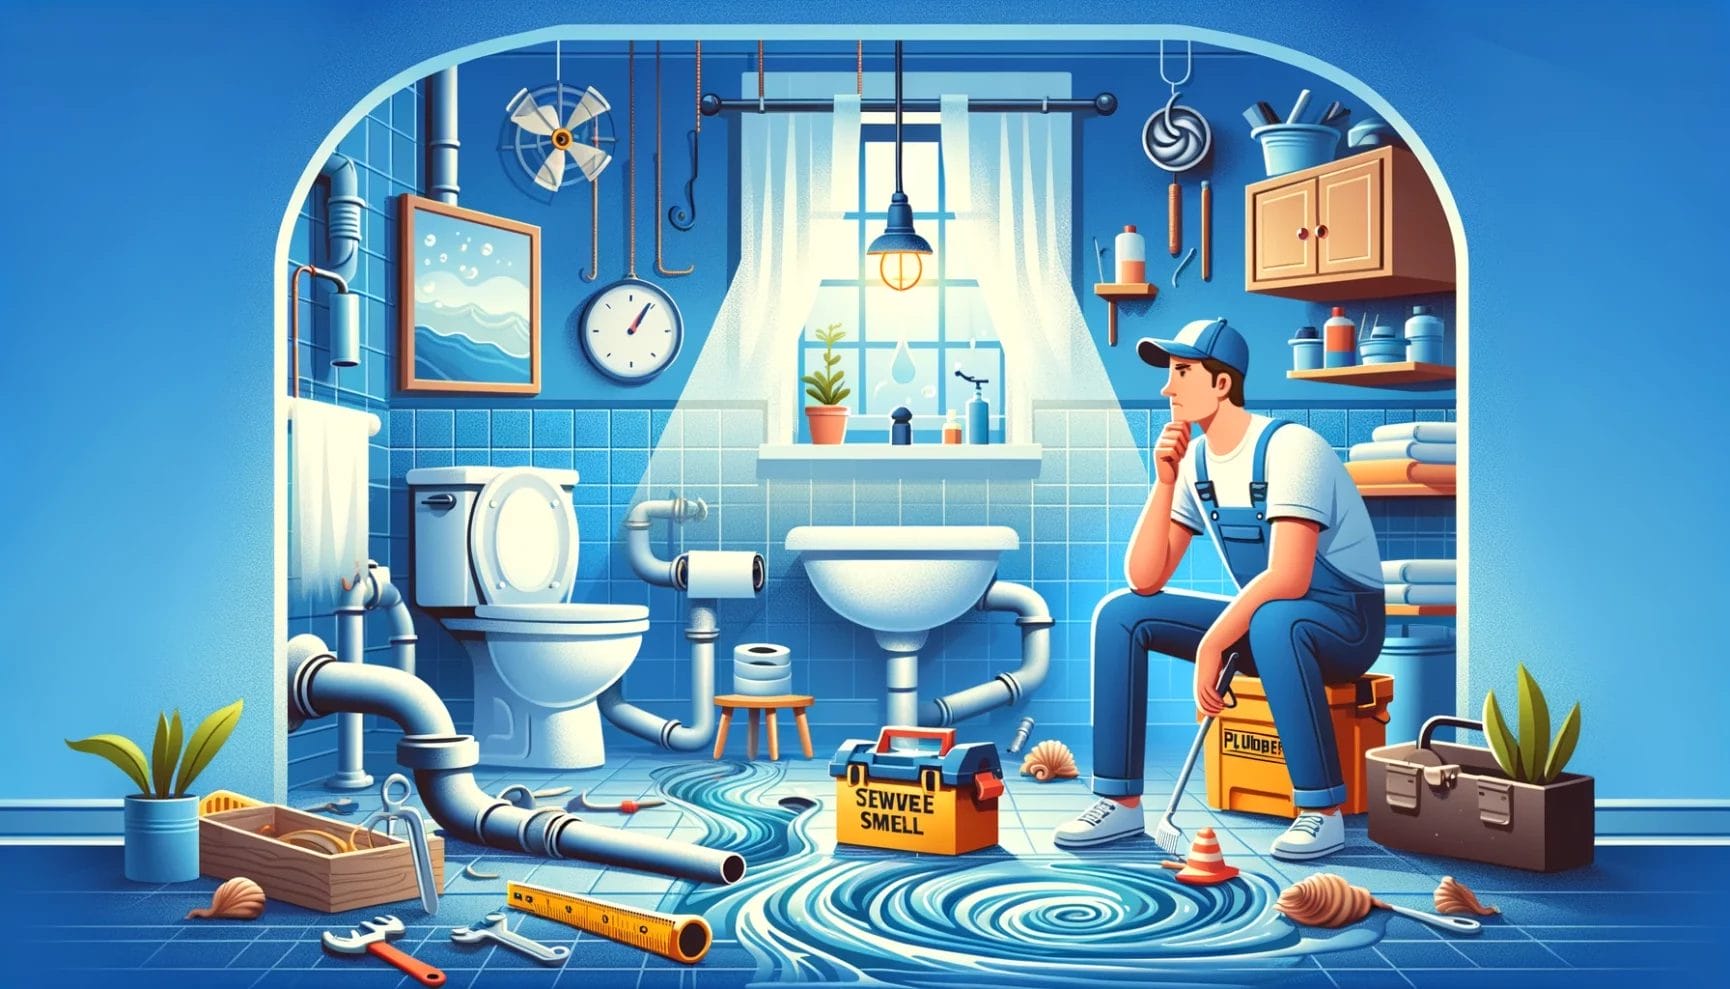 An illustration of a plumber in a bathroom.